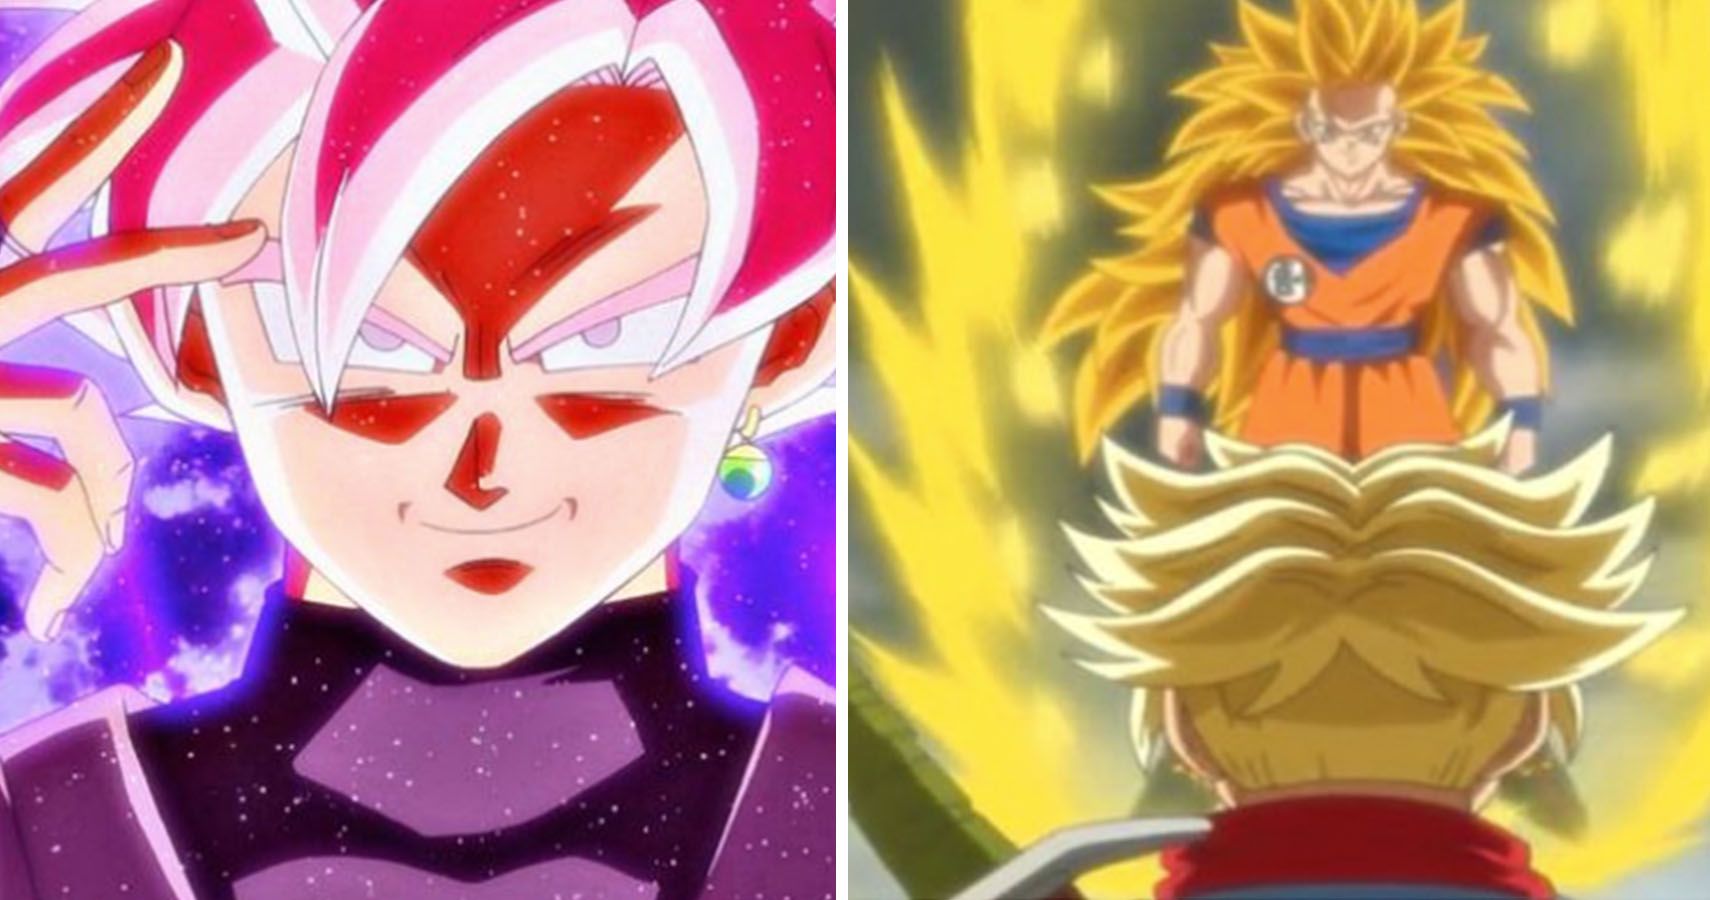 However, when dragon ball super was a thing, the first 2 sagas